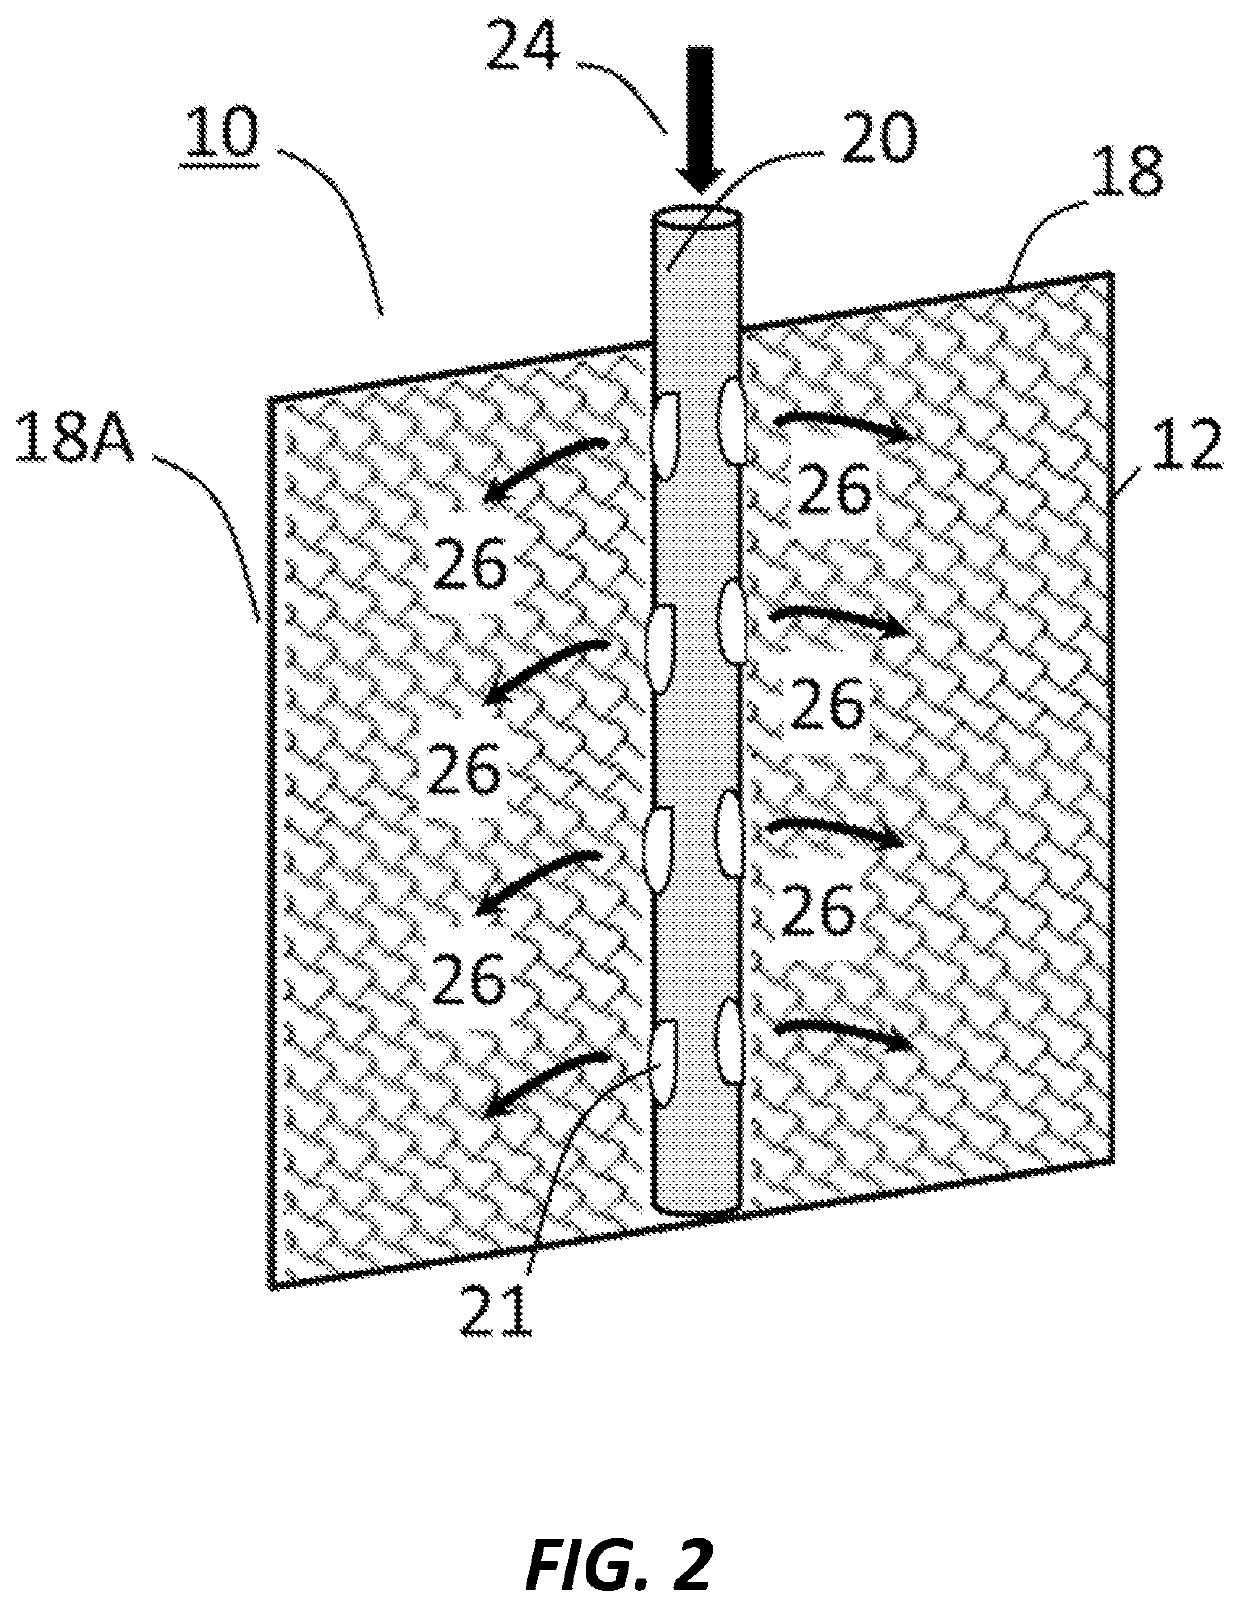 In-situ barrier device with internal injection conduit